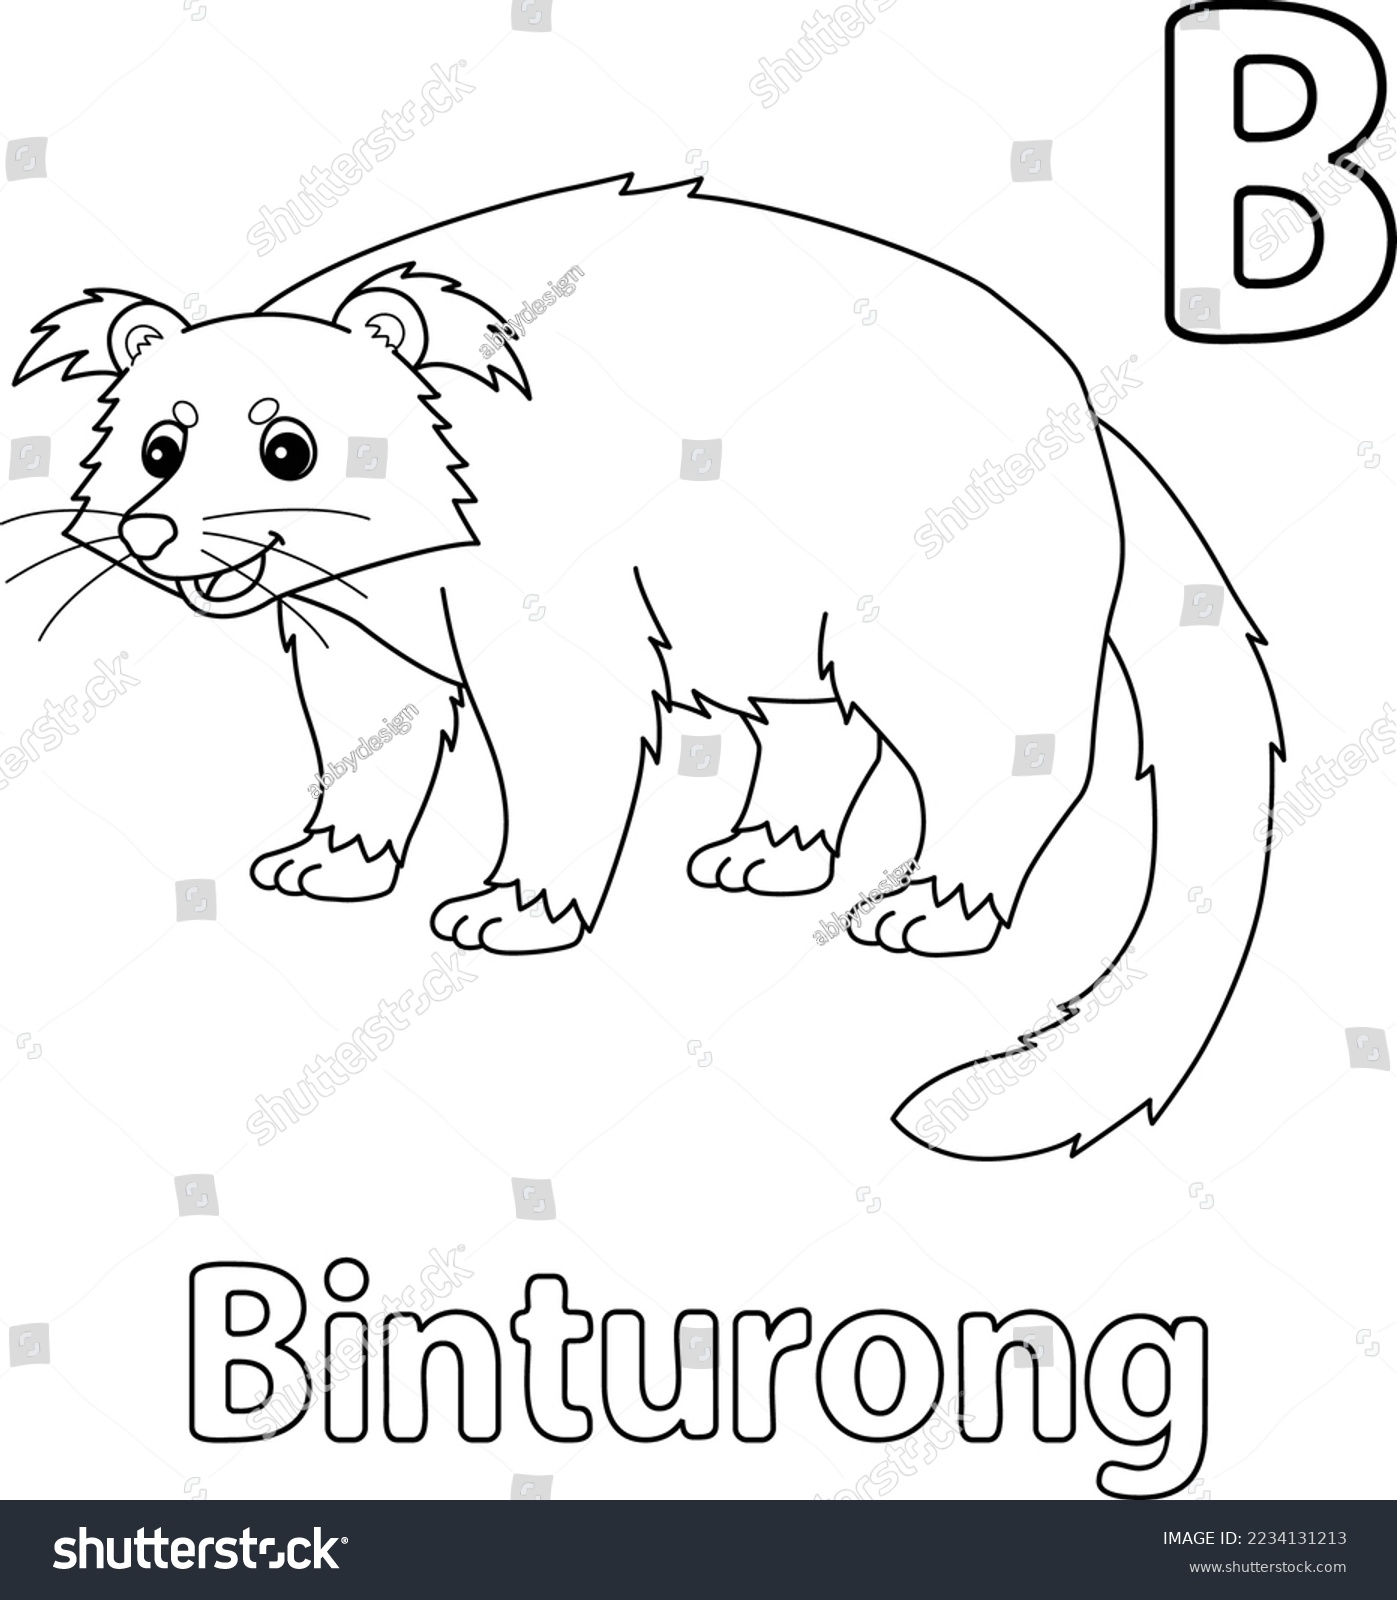 SVG of Binturong Animal Alphabet ABC Isolated Coloring B svg